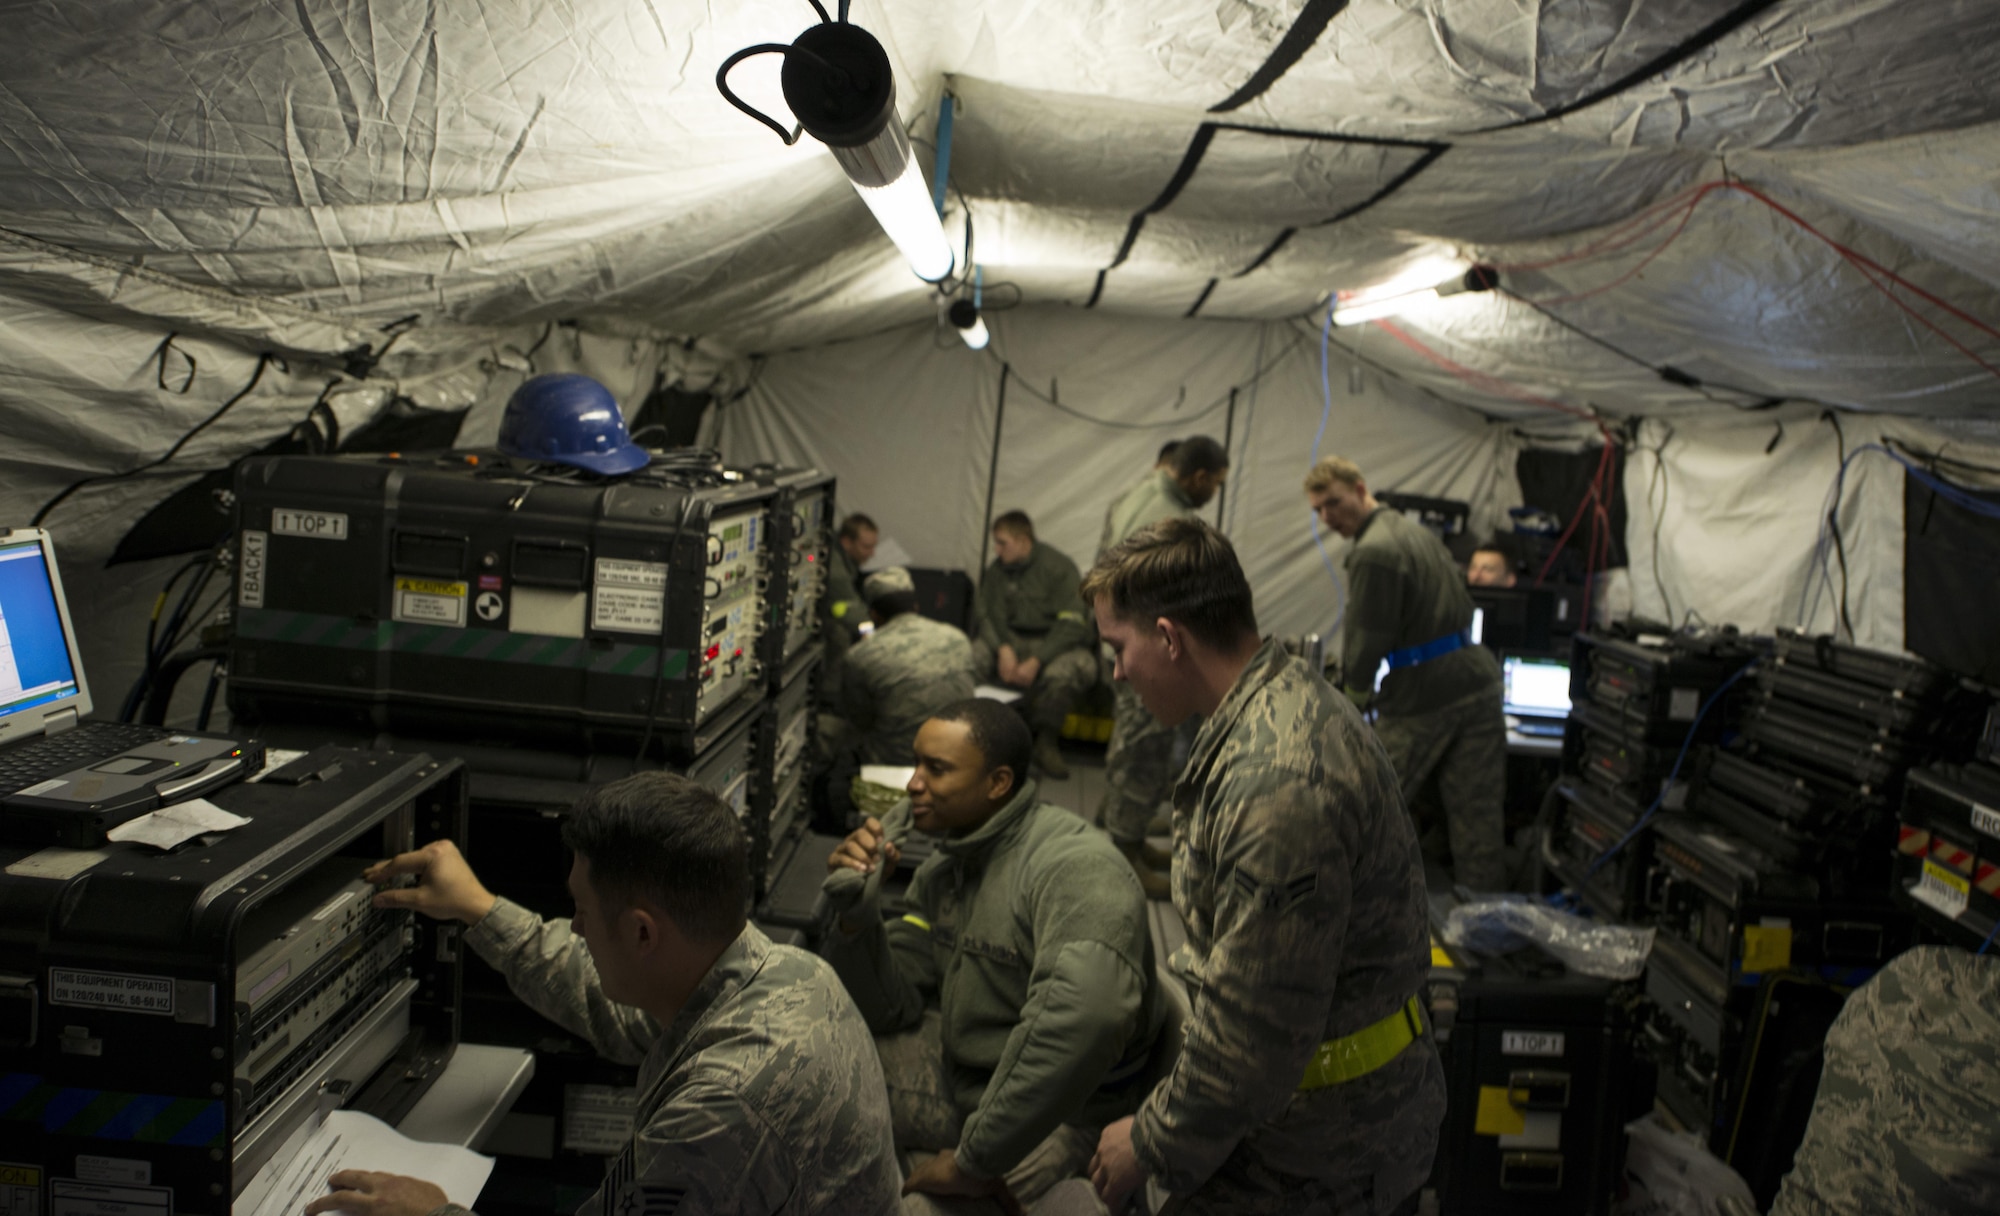 Airmen assigned to the 1st Combat Communications Squadron set up communications during exercise Healthy Thunder at Ramstein Air Base, Germany, Oct. 27, 2016. The squadron was broken into several teams during the exercise, each one playing its own role. The purpose of Healthy Thunder was to prepare the Airmen for a deployed situation. (U.S. Air Force photo by Senior Airman Tryphena Mayhugh)